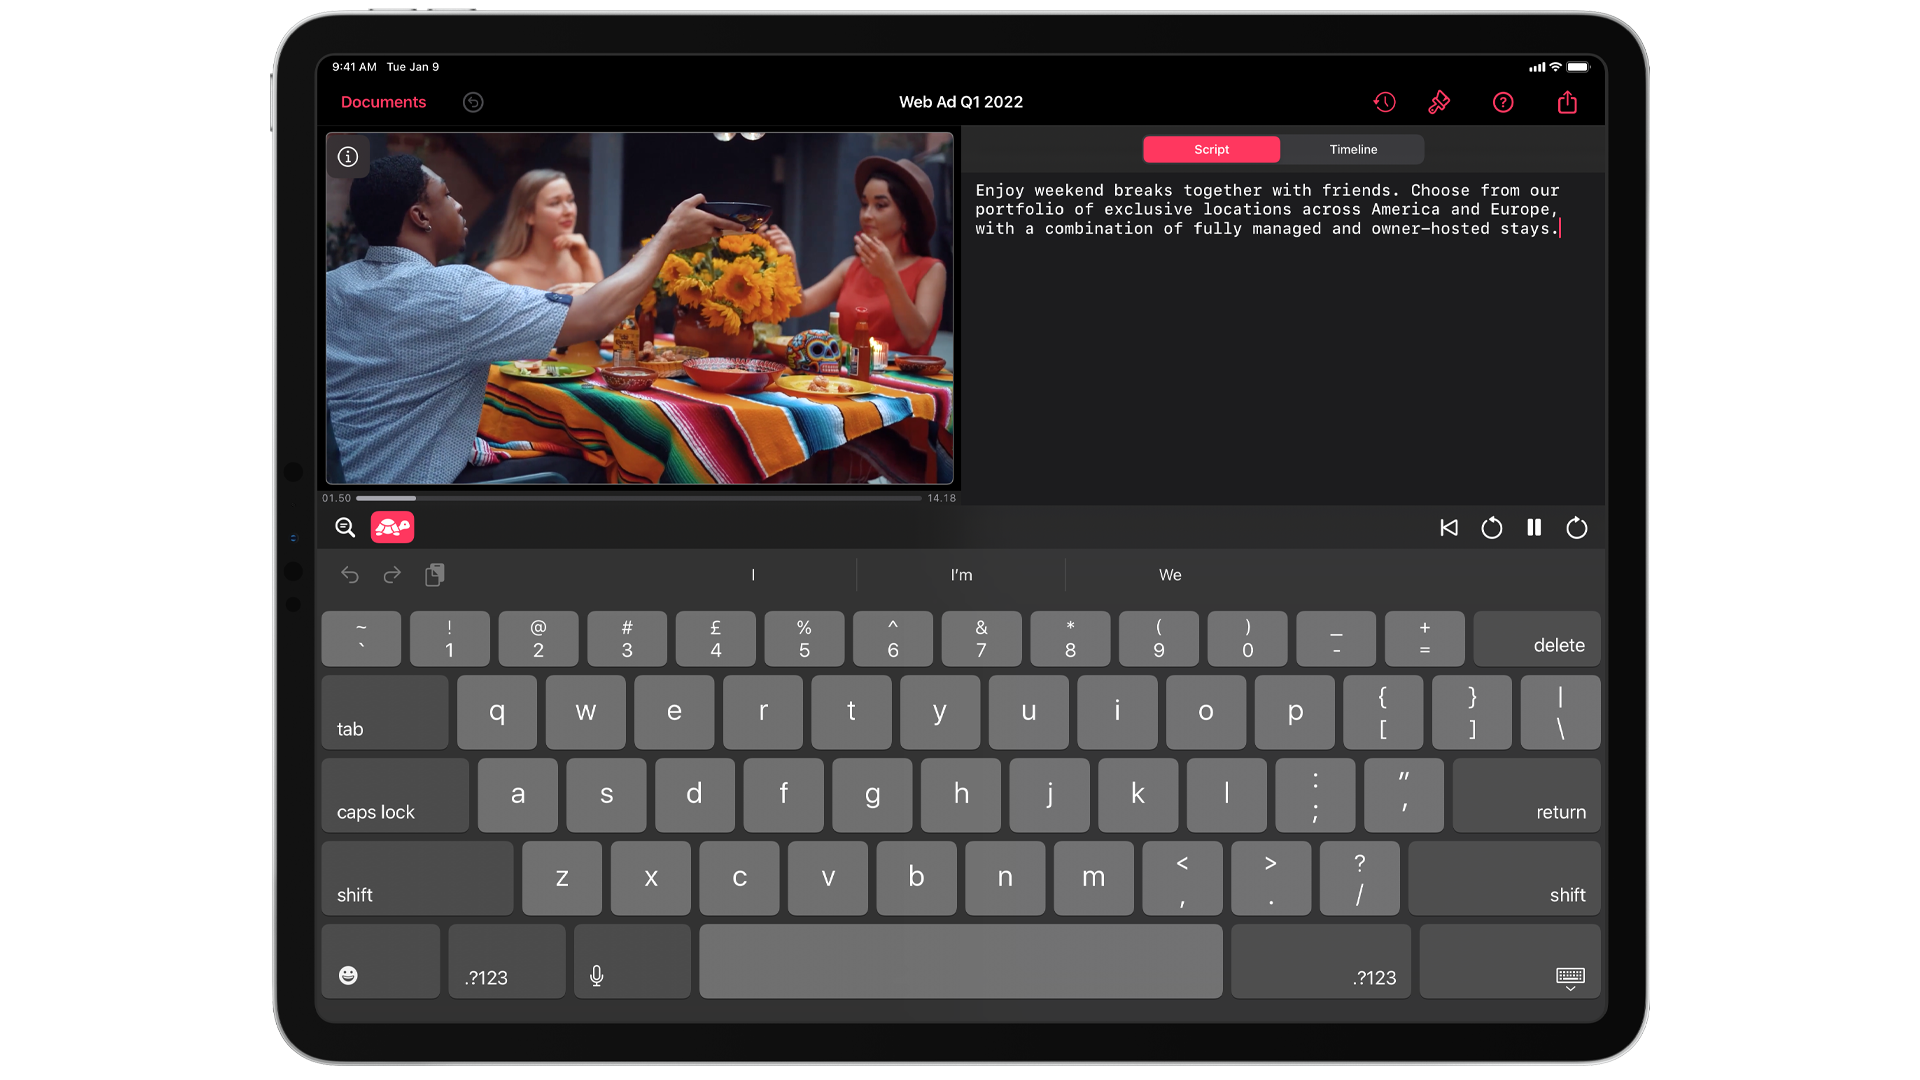 Captionista easily adds subtitles to your videos on iOS and iPadOS